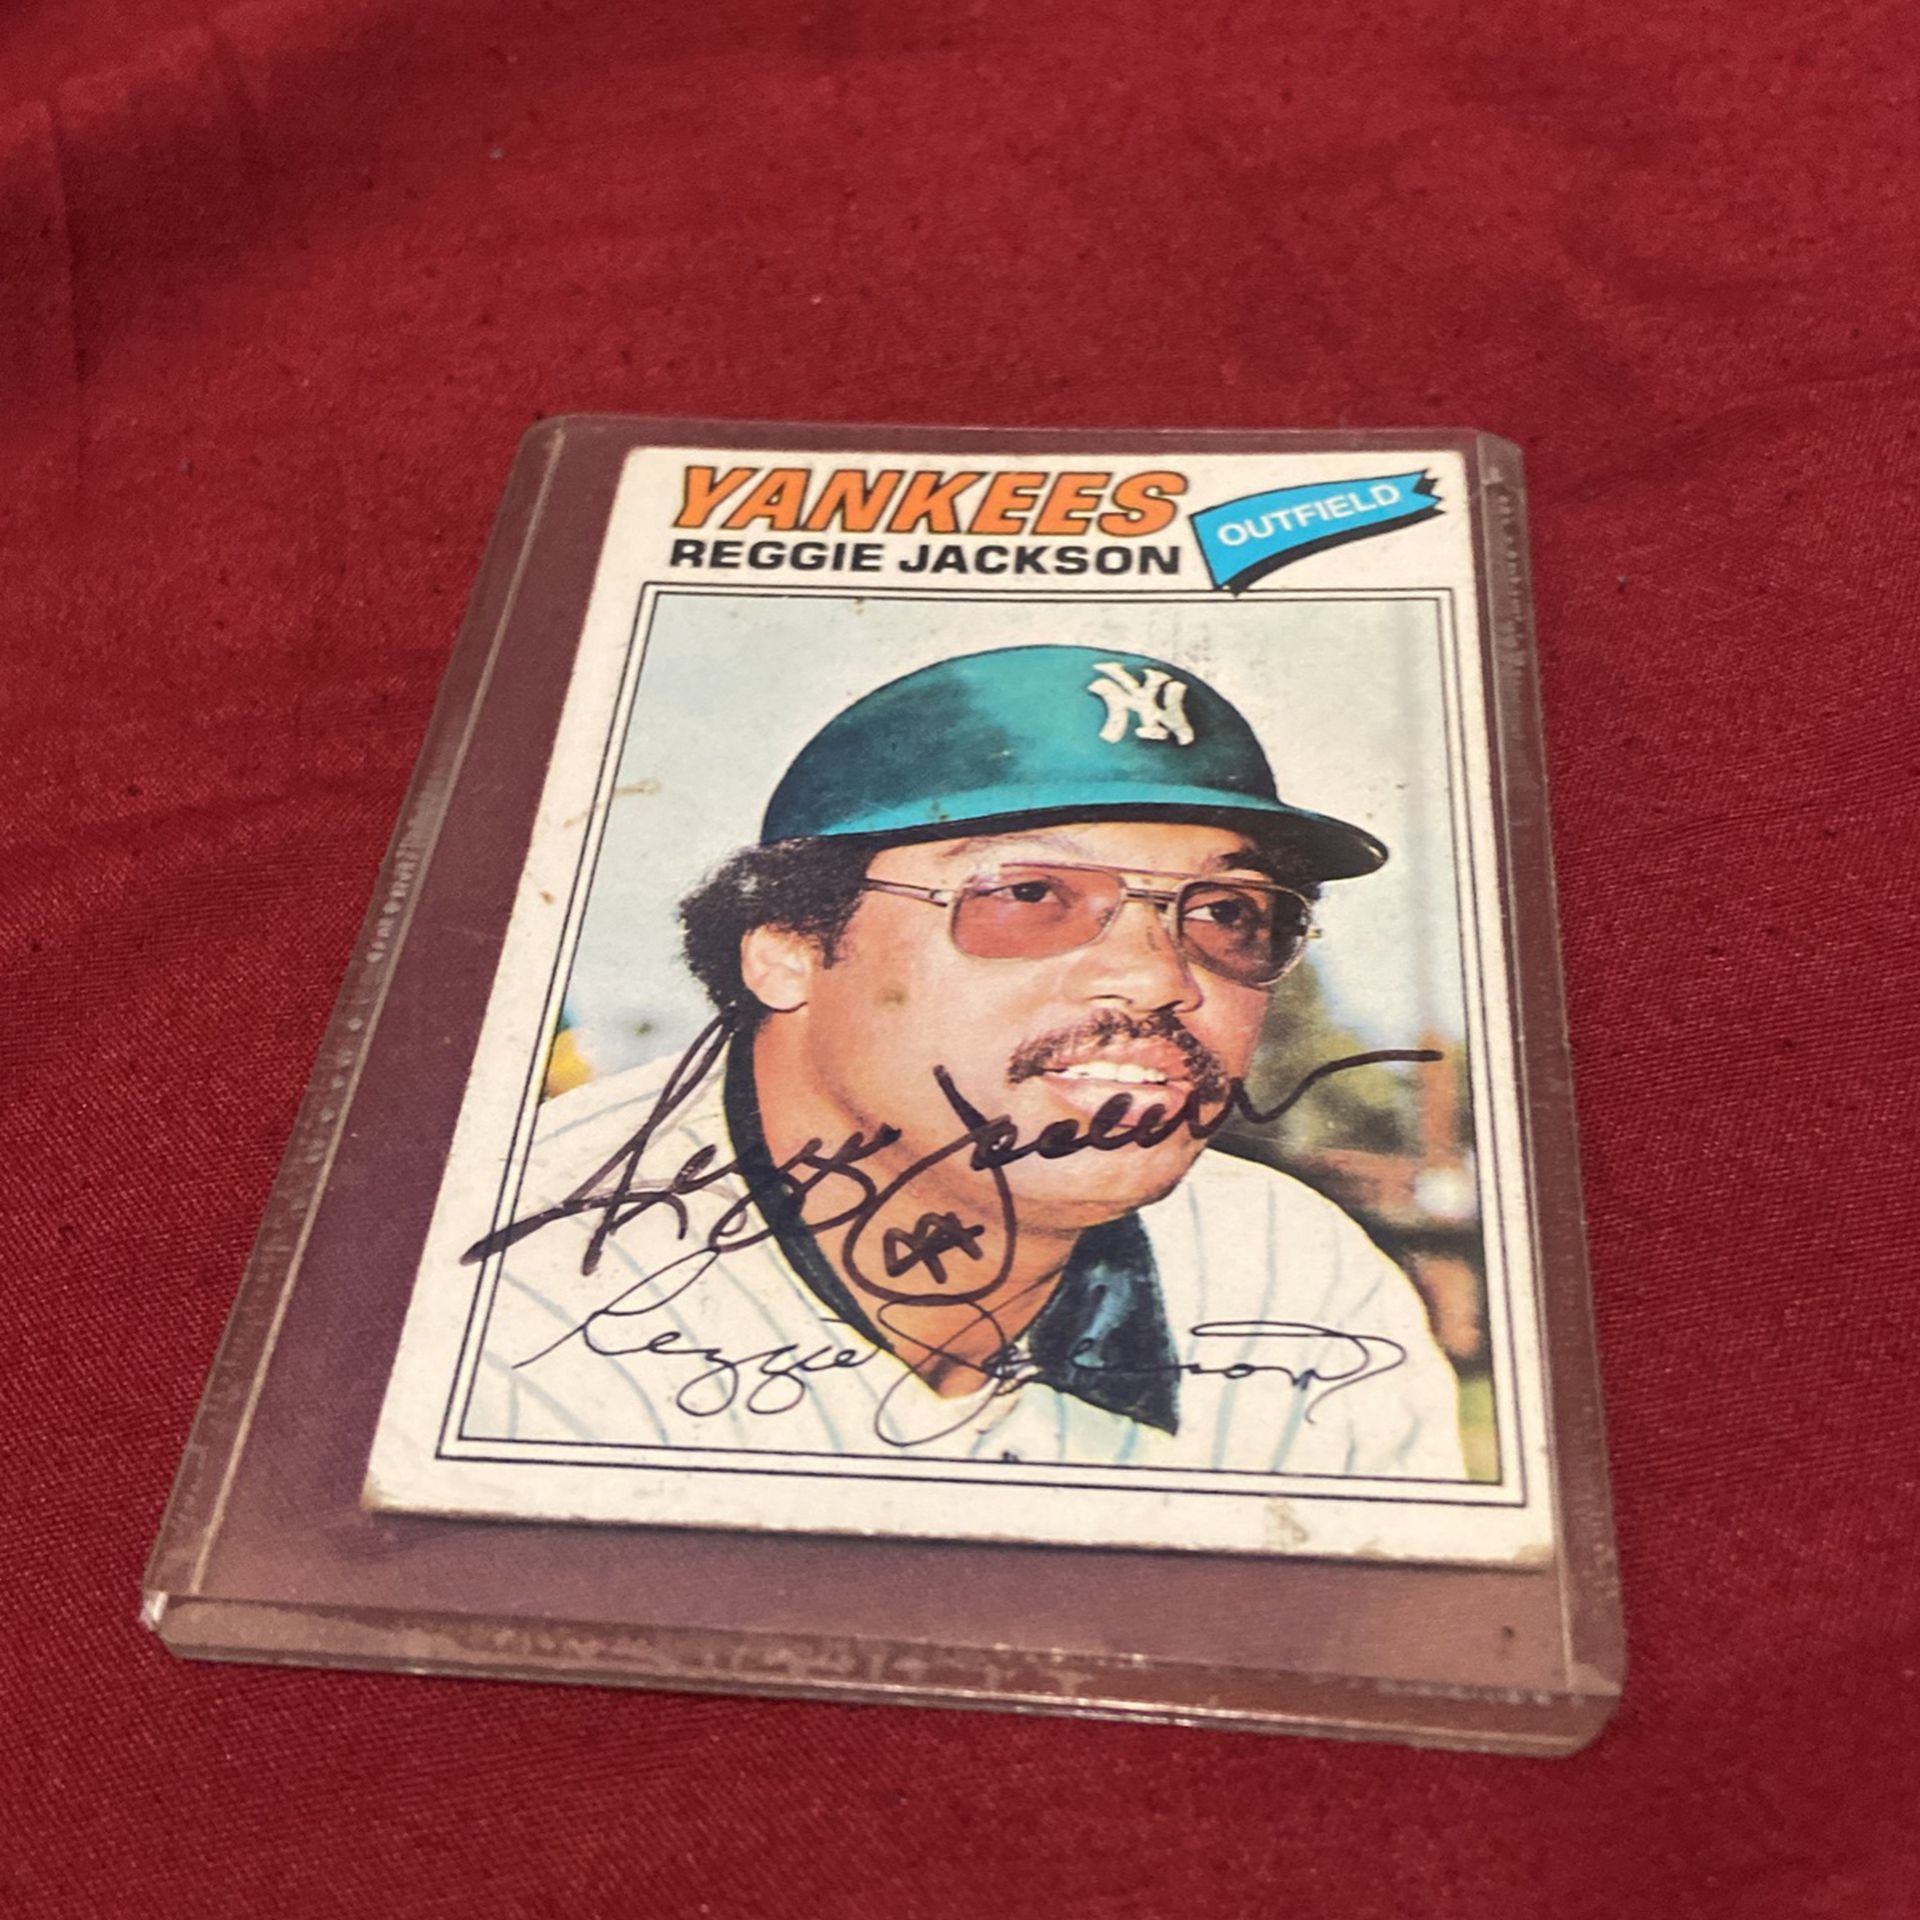 Autographed Reggie Jackson Baseball Card for Sale in The Bronx, NY - OfferUp